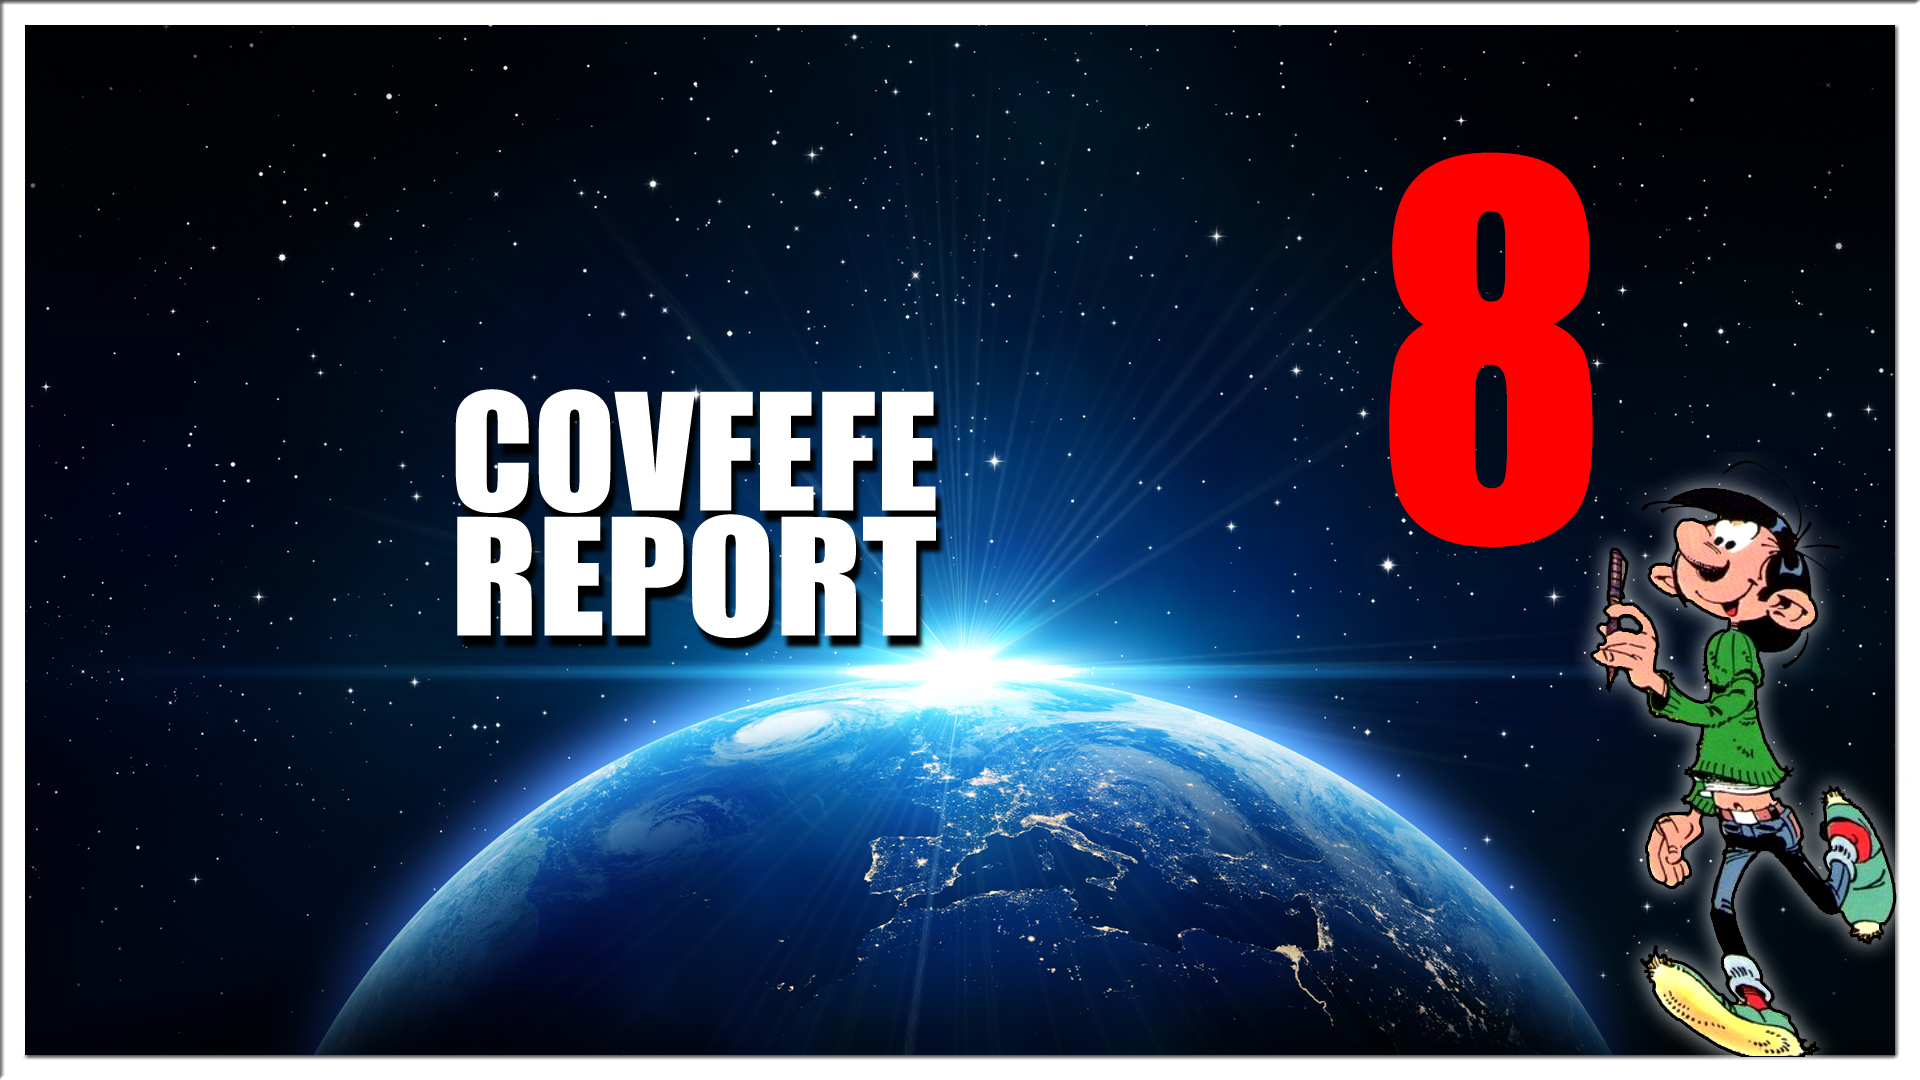 Covfefe Report 8. Albert Pike,  Isaac Long, Jacquees de Molay